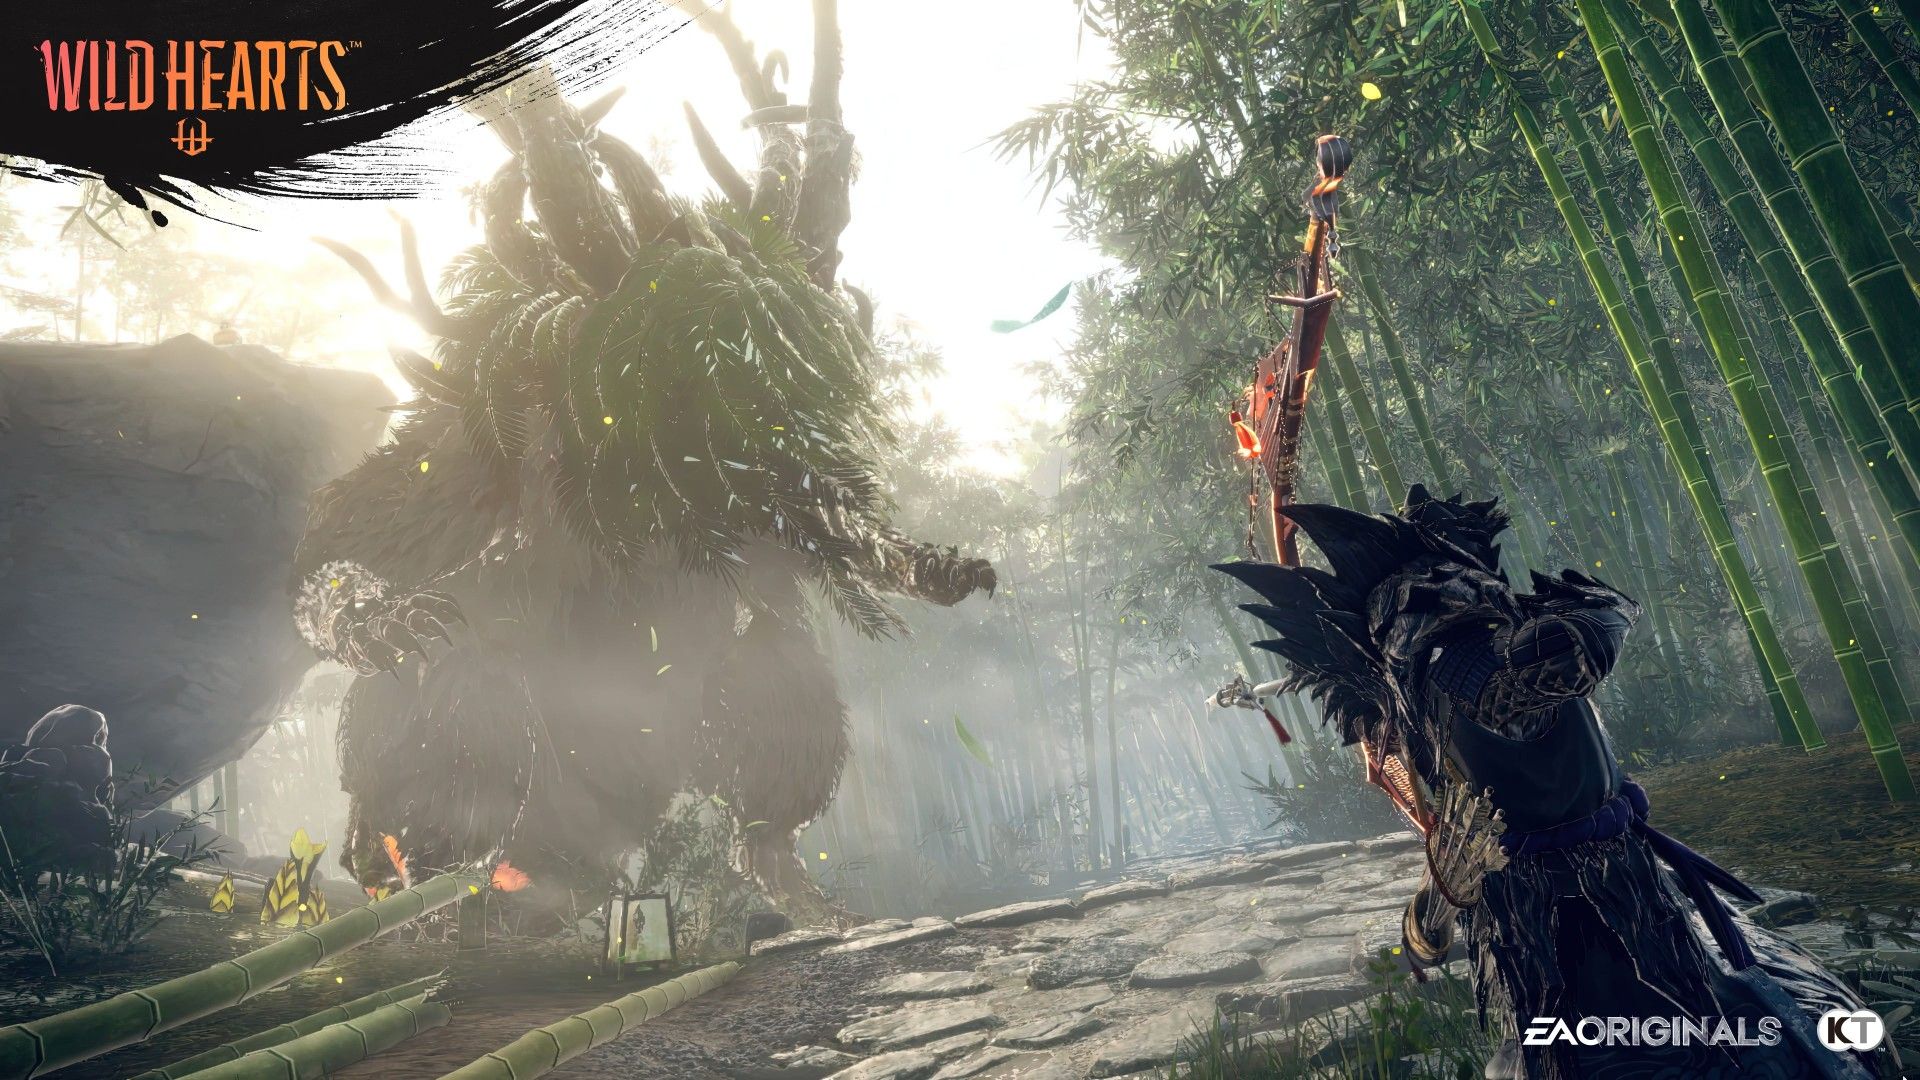 Wild Hearts' Sapscourge monster charging at a player holding a bow and arrow.